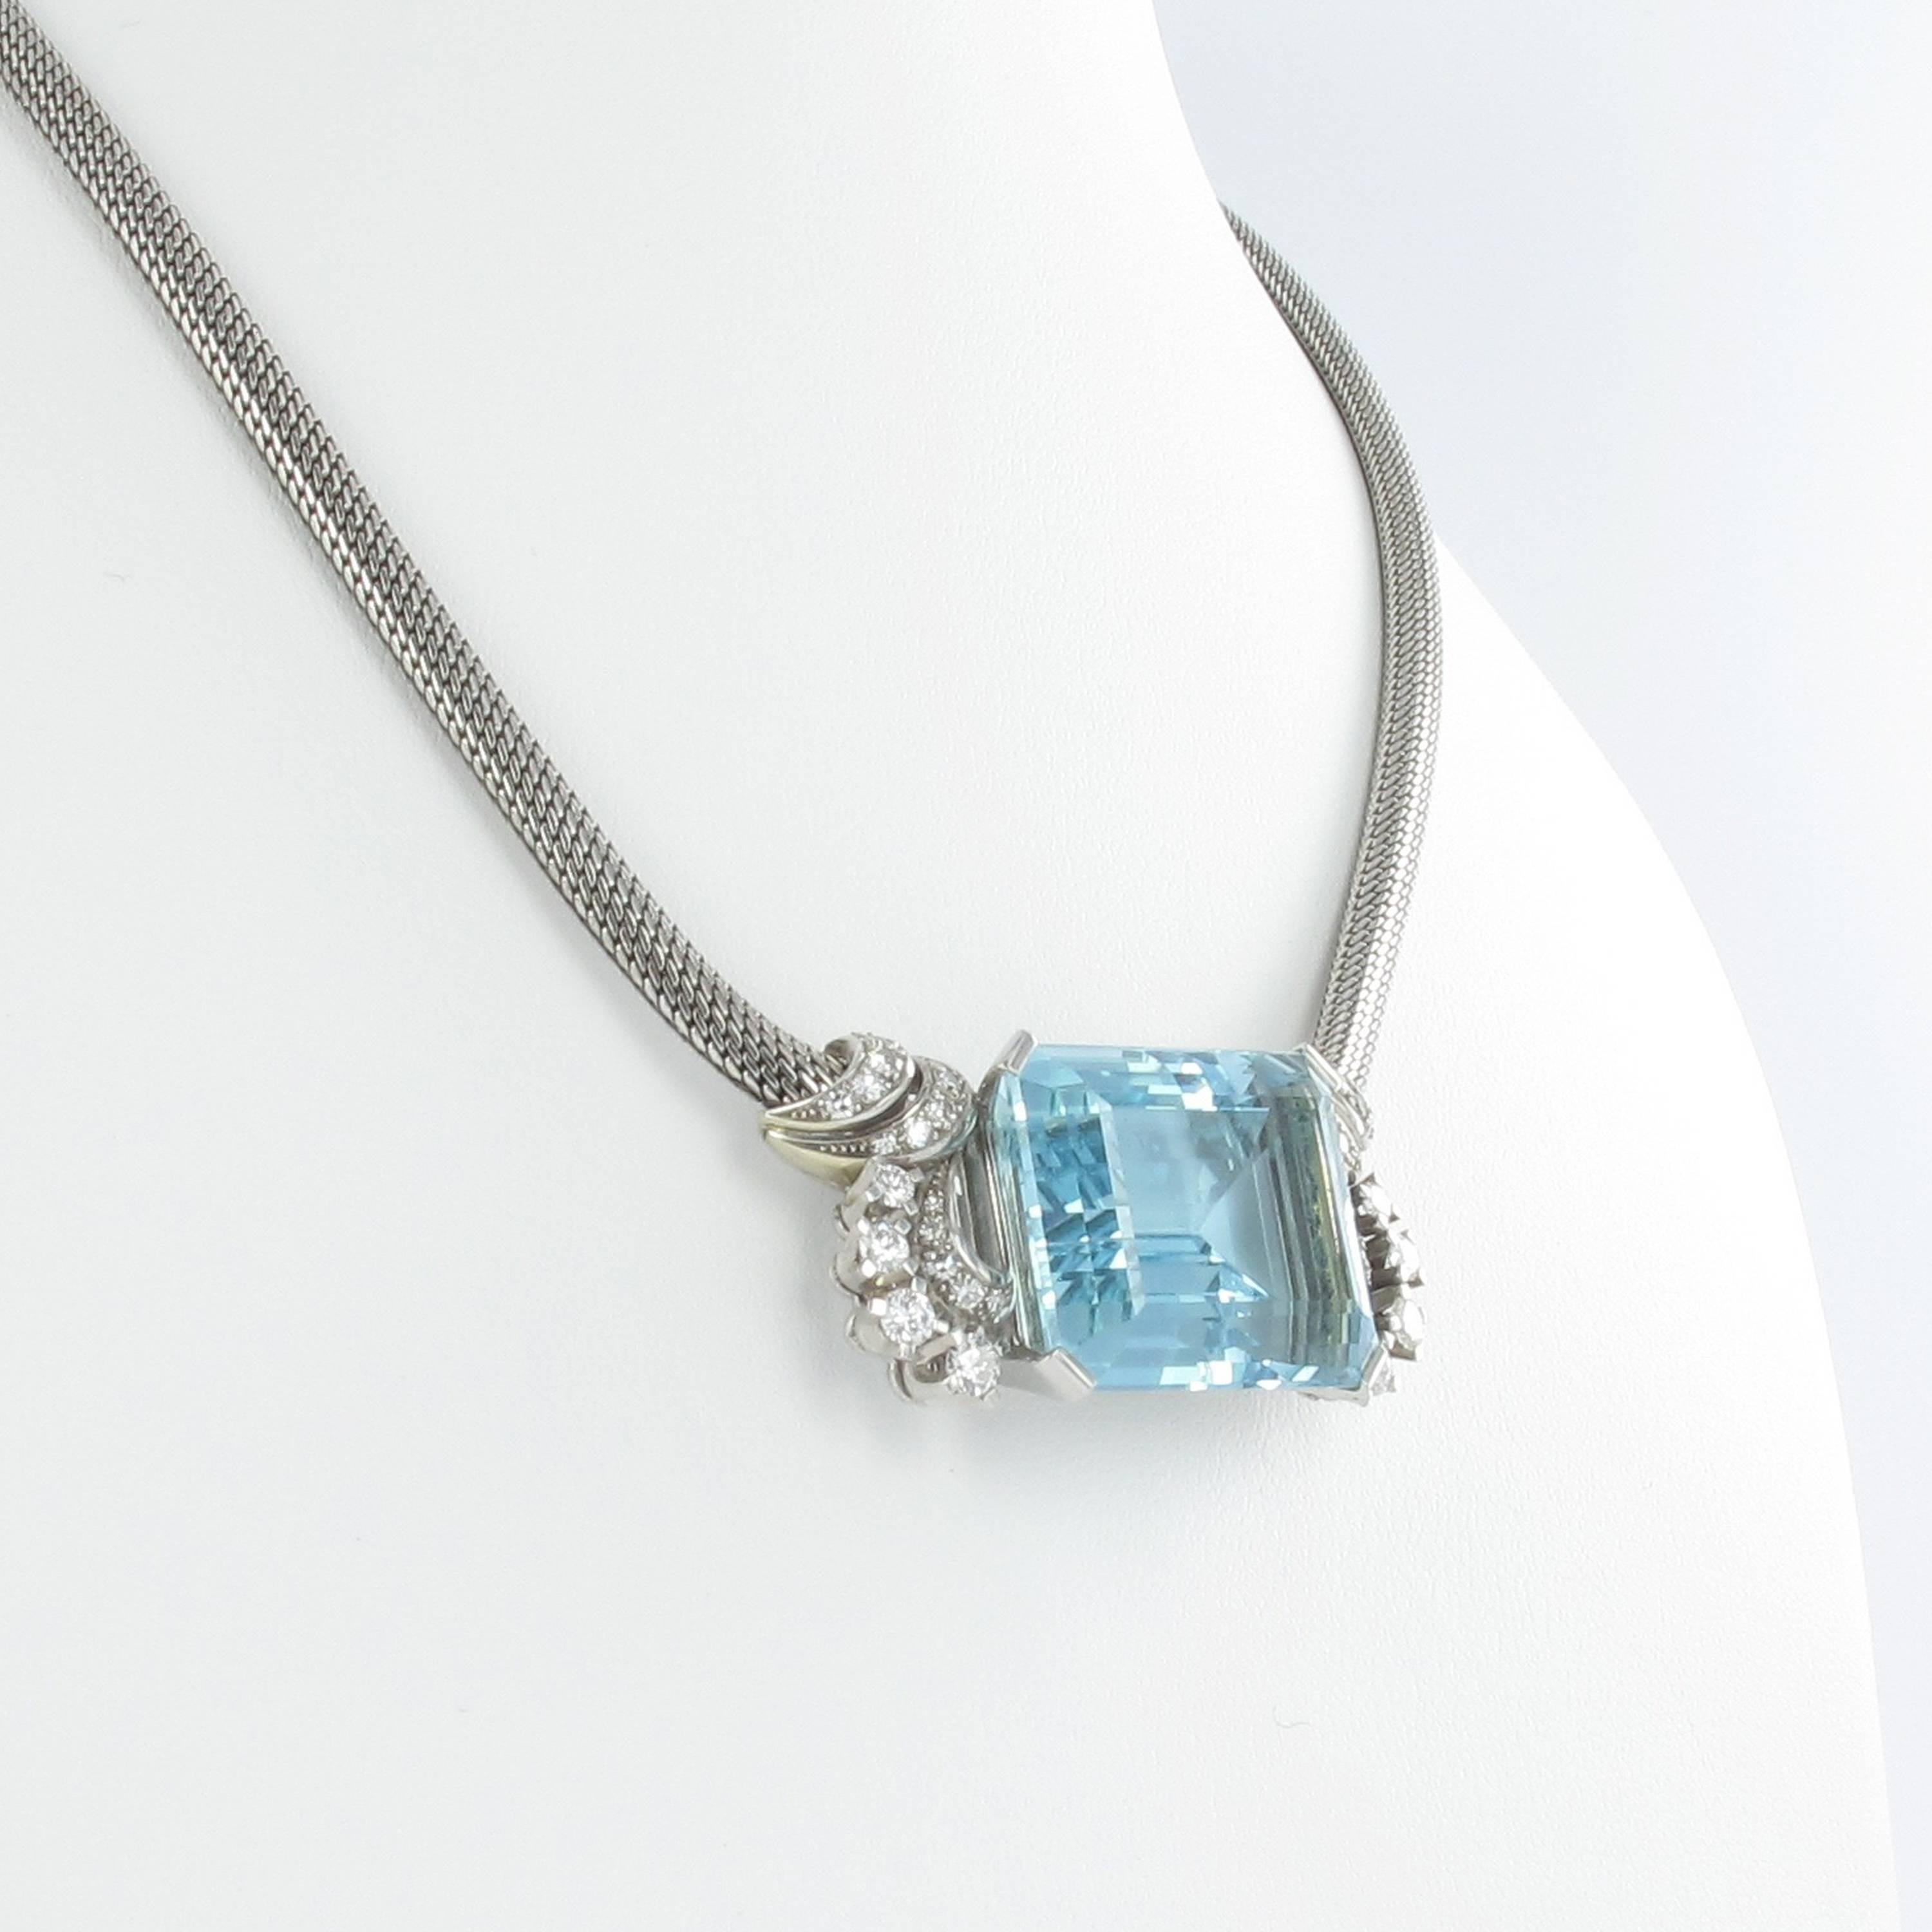 Impressive octagonal cut aquamarine of approx. 37.00 ct set in a 18K white gold necklace. Center stone is surrounded by 36 diamonds of total approx. 1.40 ct. Fine workmanship.

Stock no. 1000019734